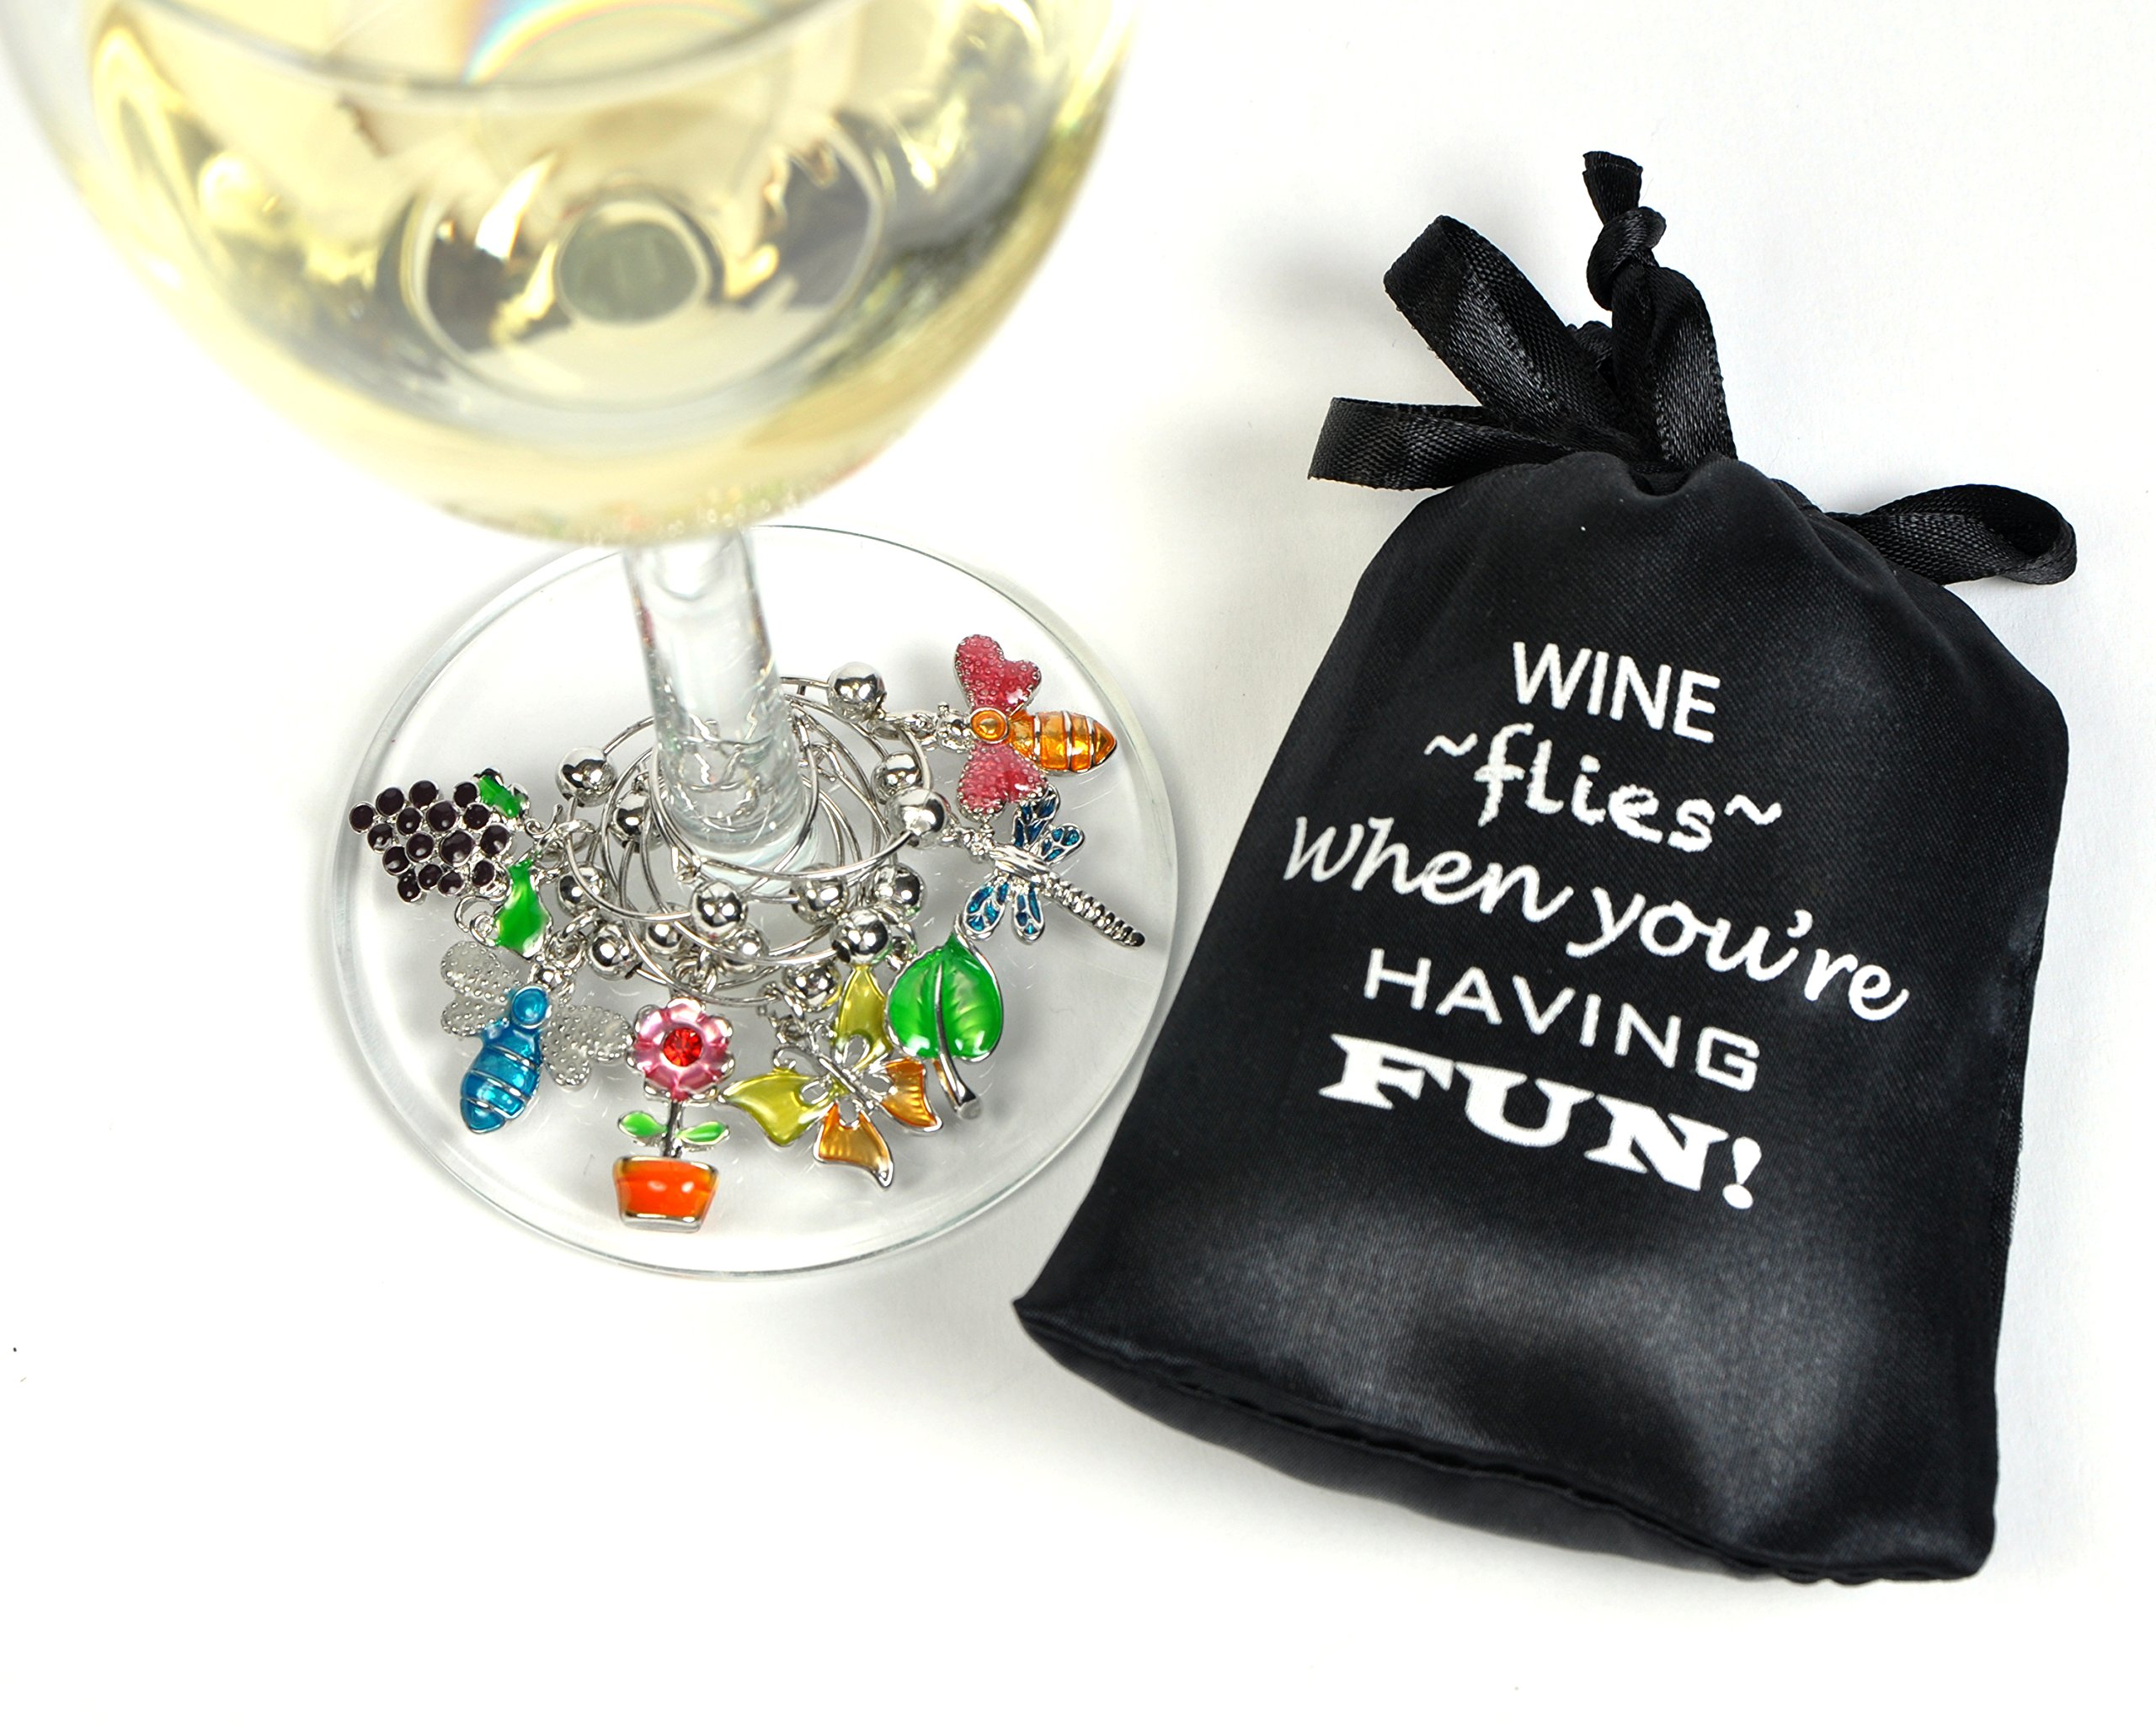 Cork & Leaf Flowers & Insects Wine Glass Markers - Set of 7, Wine Charms, Wine Accessories and Gifts, Drink Markers, Wine Glass Charms, Includes a Black Sateen Storage Bag